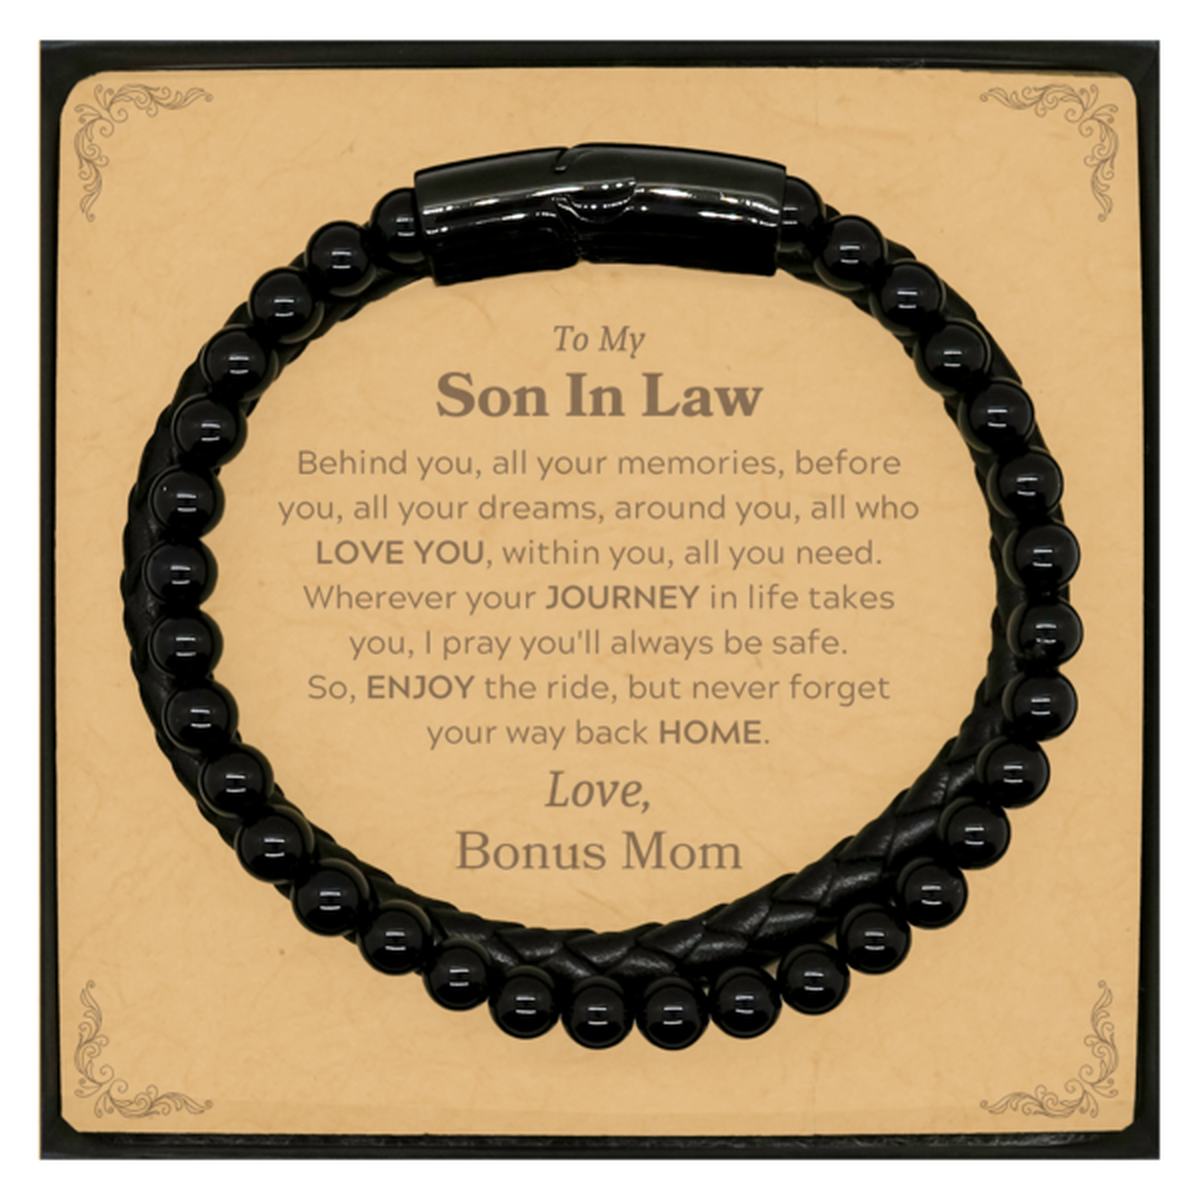 To My Son In Law Graduation Gifts from Bonus Mom, Son In Law Stone Leather Bracelets Christmas Birthday Gifts for Son In Law Behind you, all your memories, before you, all your dreams. Love, Bonus Mom